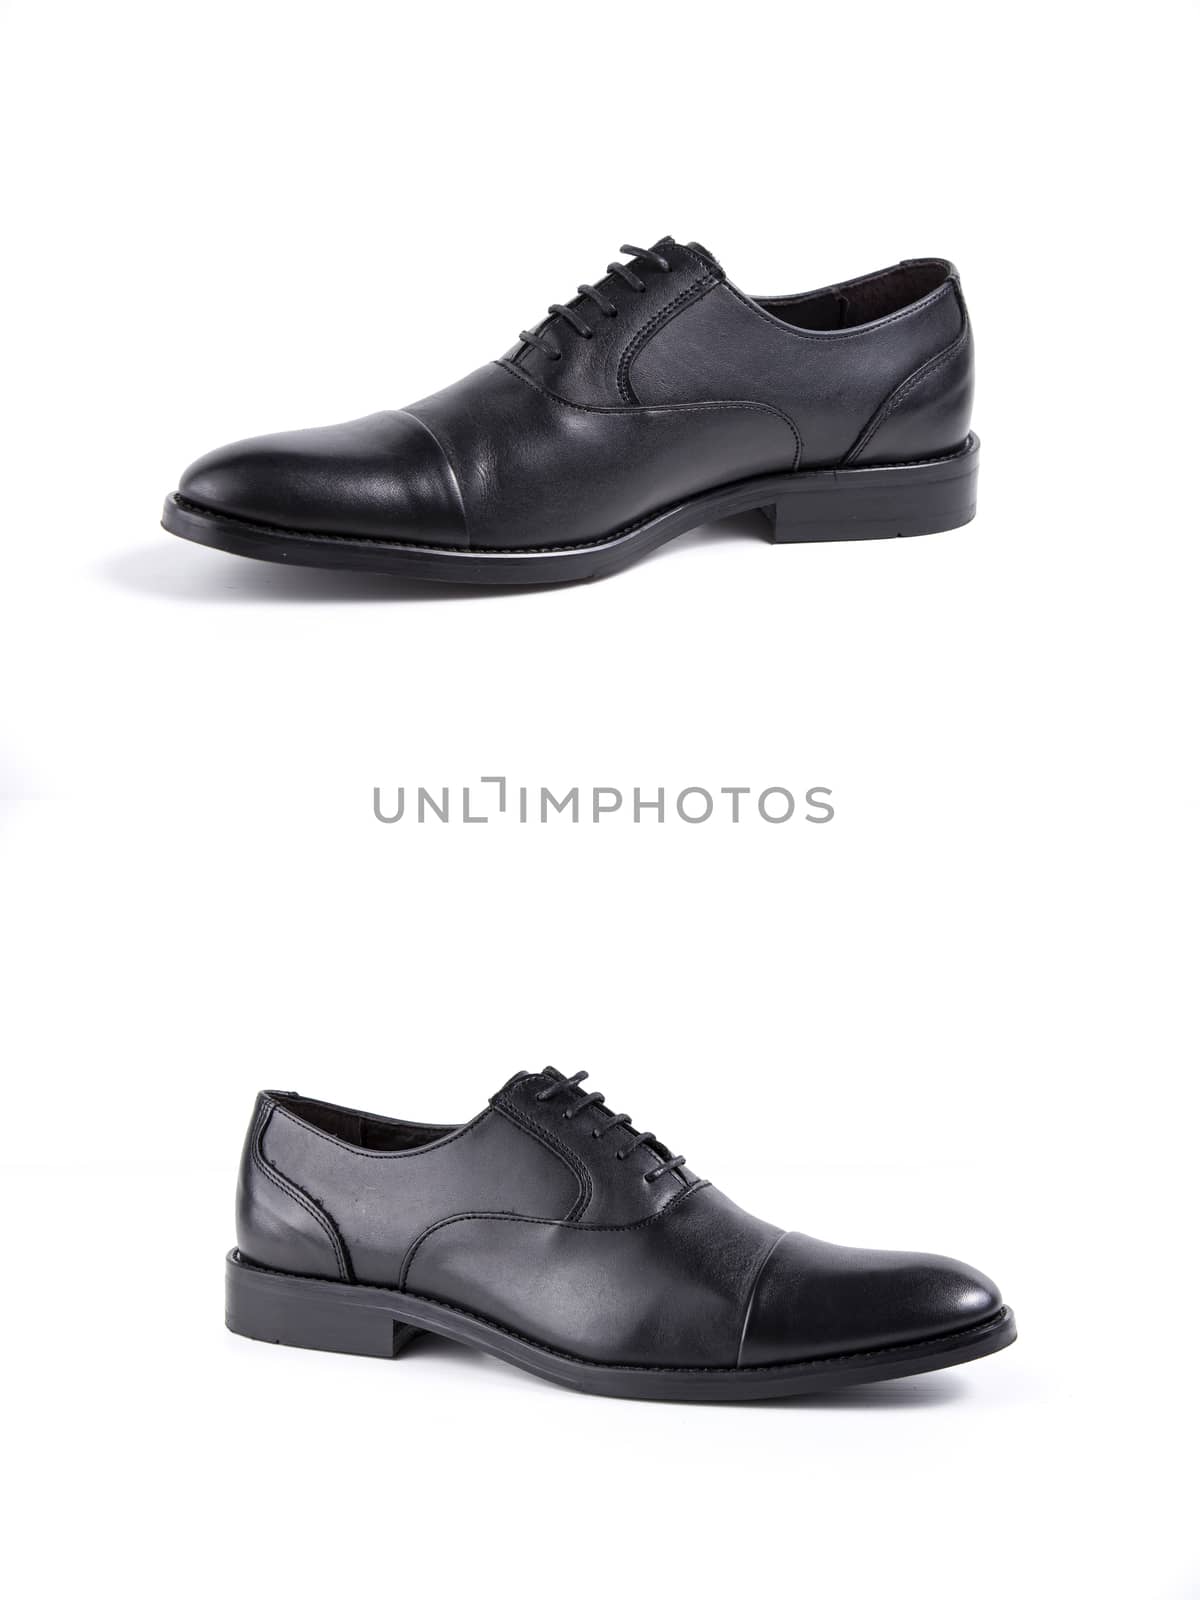 Male black leather shoes on white background, isolated product. by GeorgeVieiraSilva